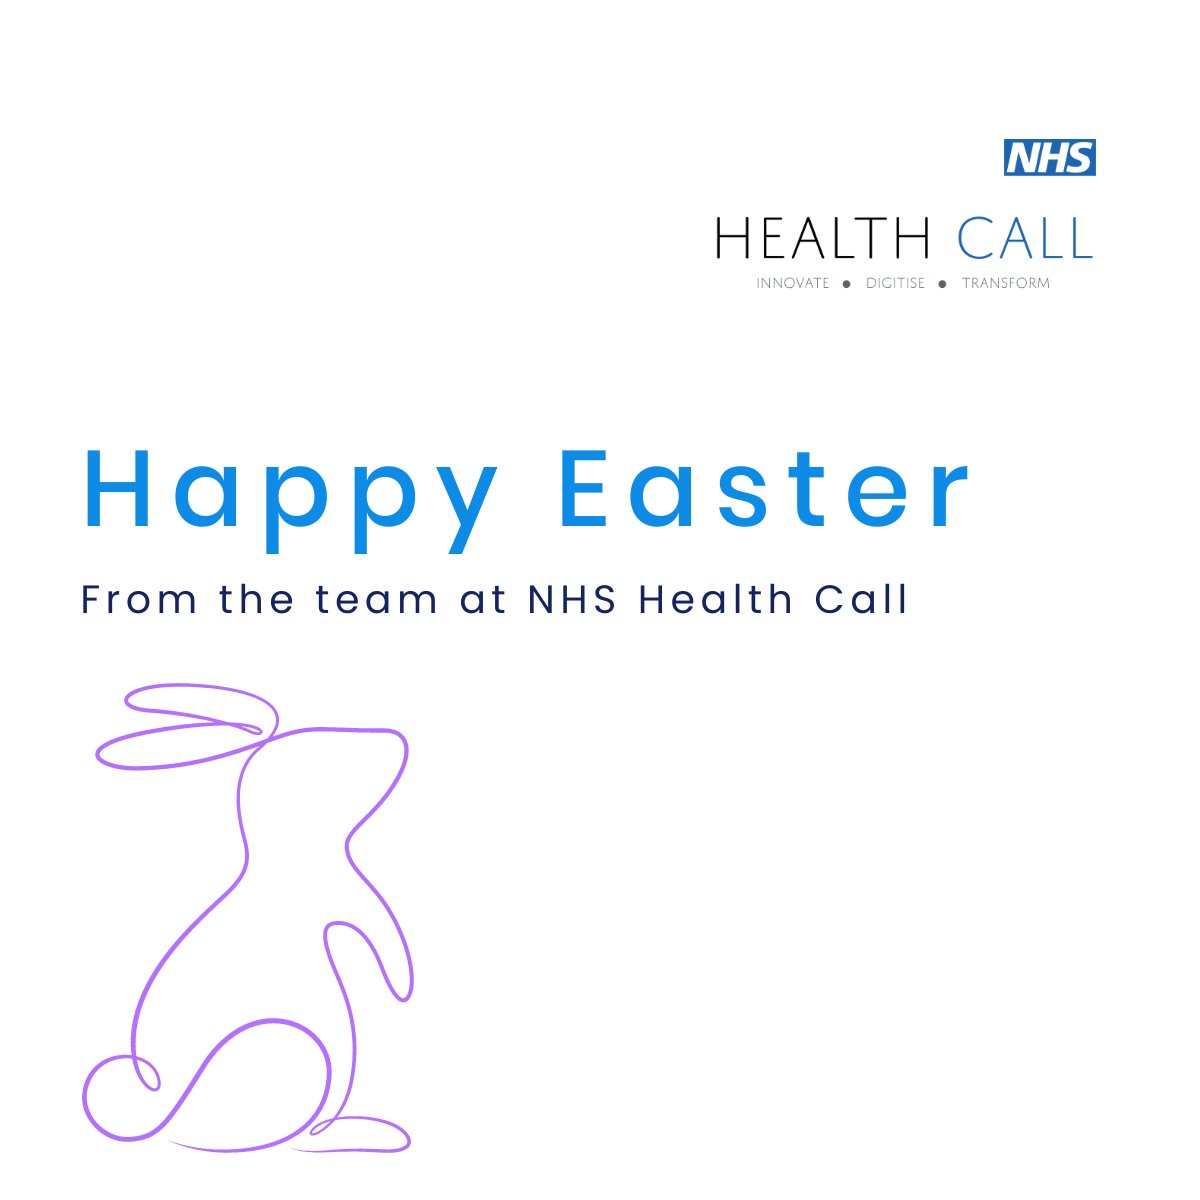 Happy Easter from the team at NHS Health Call! 🐰 Wishing you a wonderful break! 🐣 Huge thank you to those who are working through the long weekend, keeping essential services running smoothly. 💙 #HappyEaster #NHSHeroes